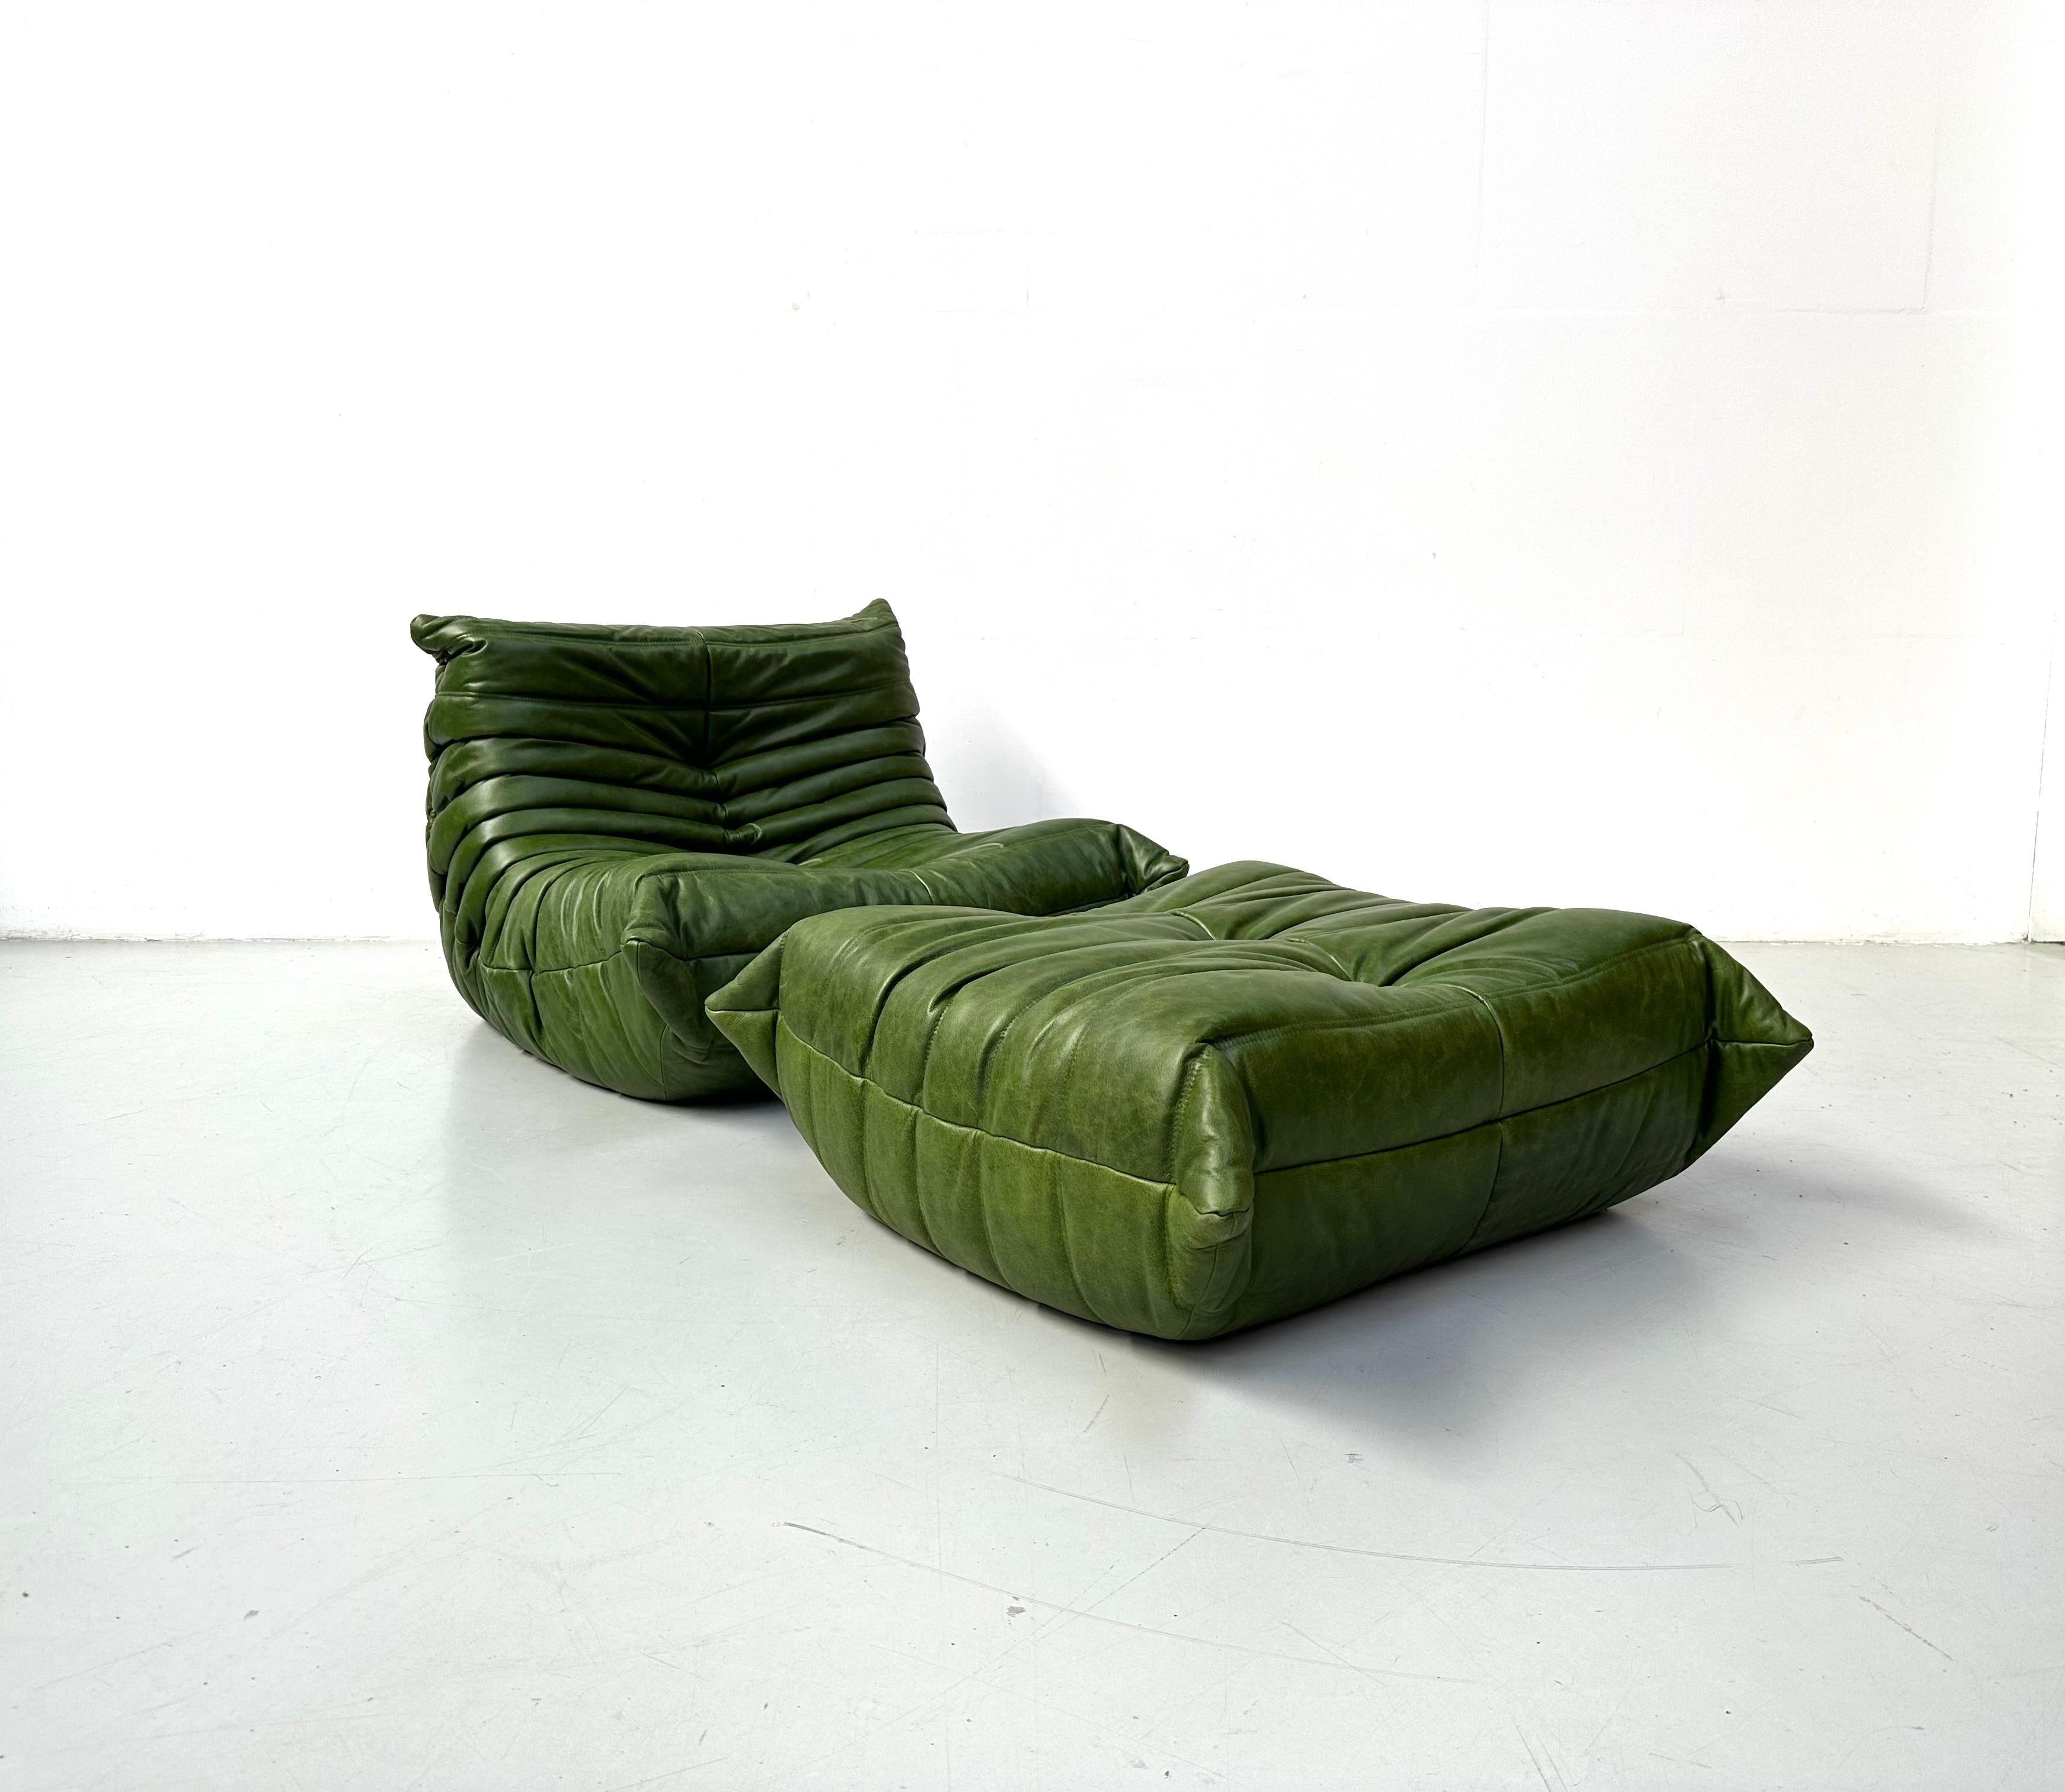 20th Century French Togo Chair and Ottoman in Green Leather by M. Ducaroy for Ligne Roset.